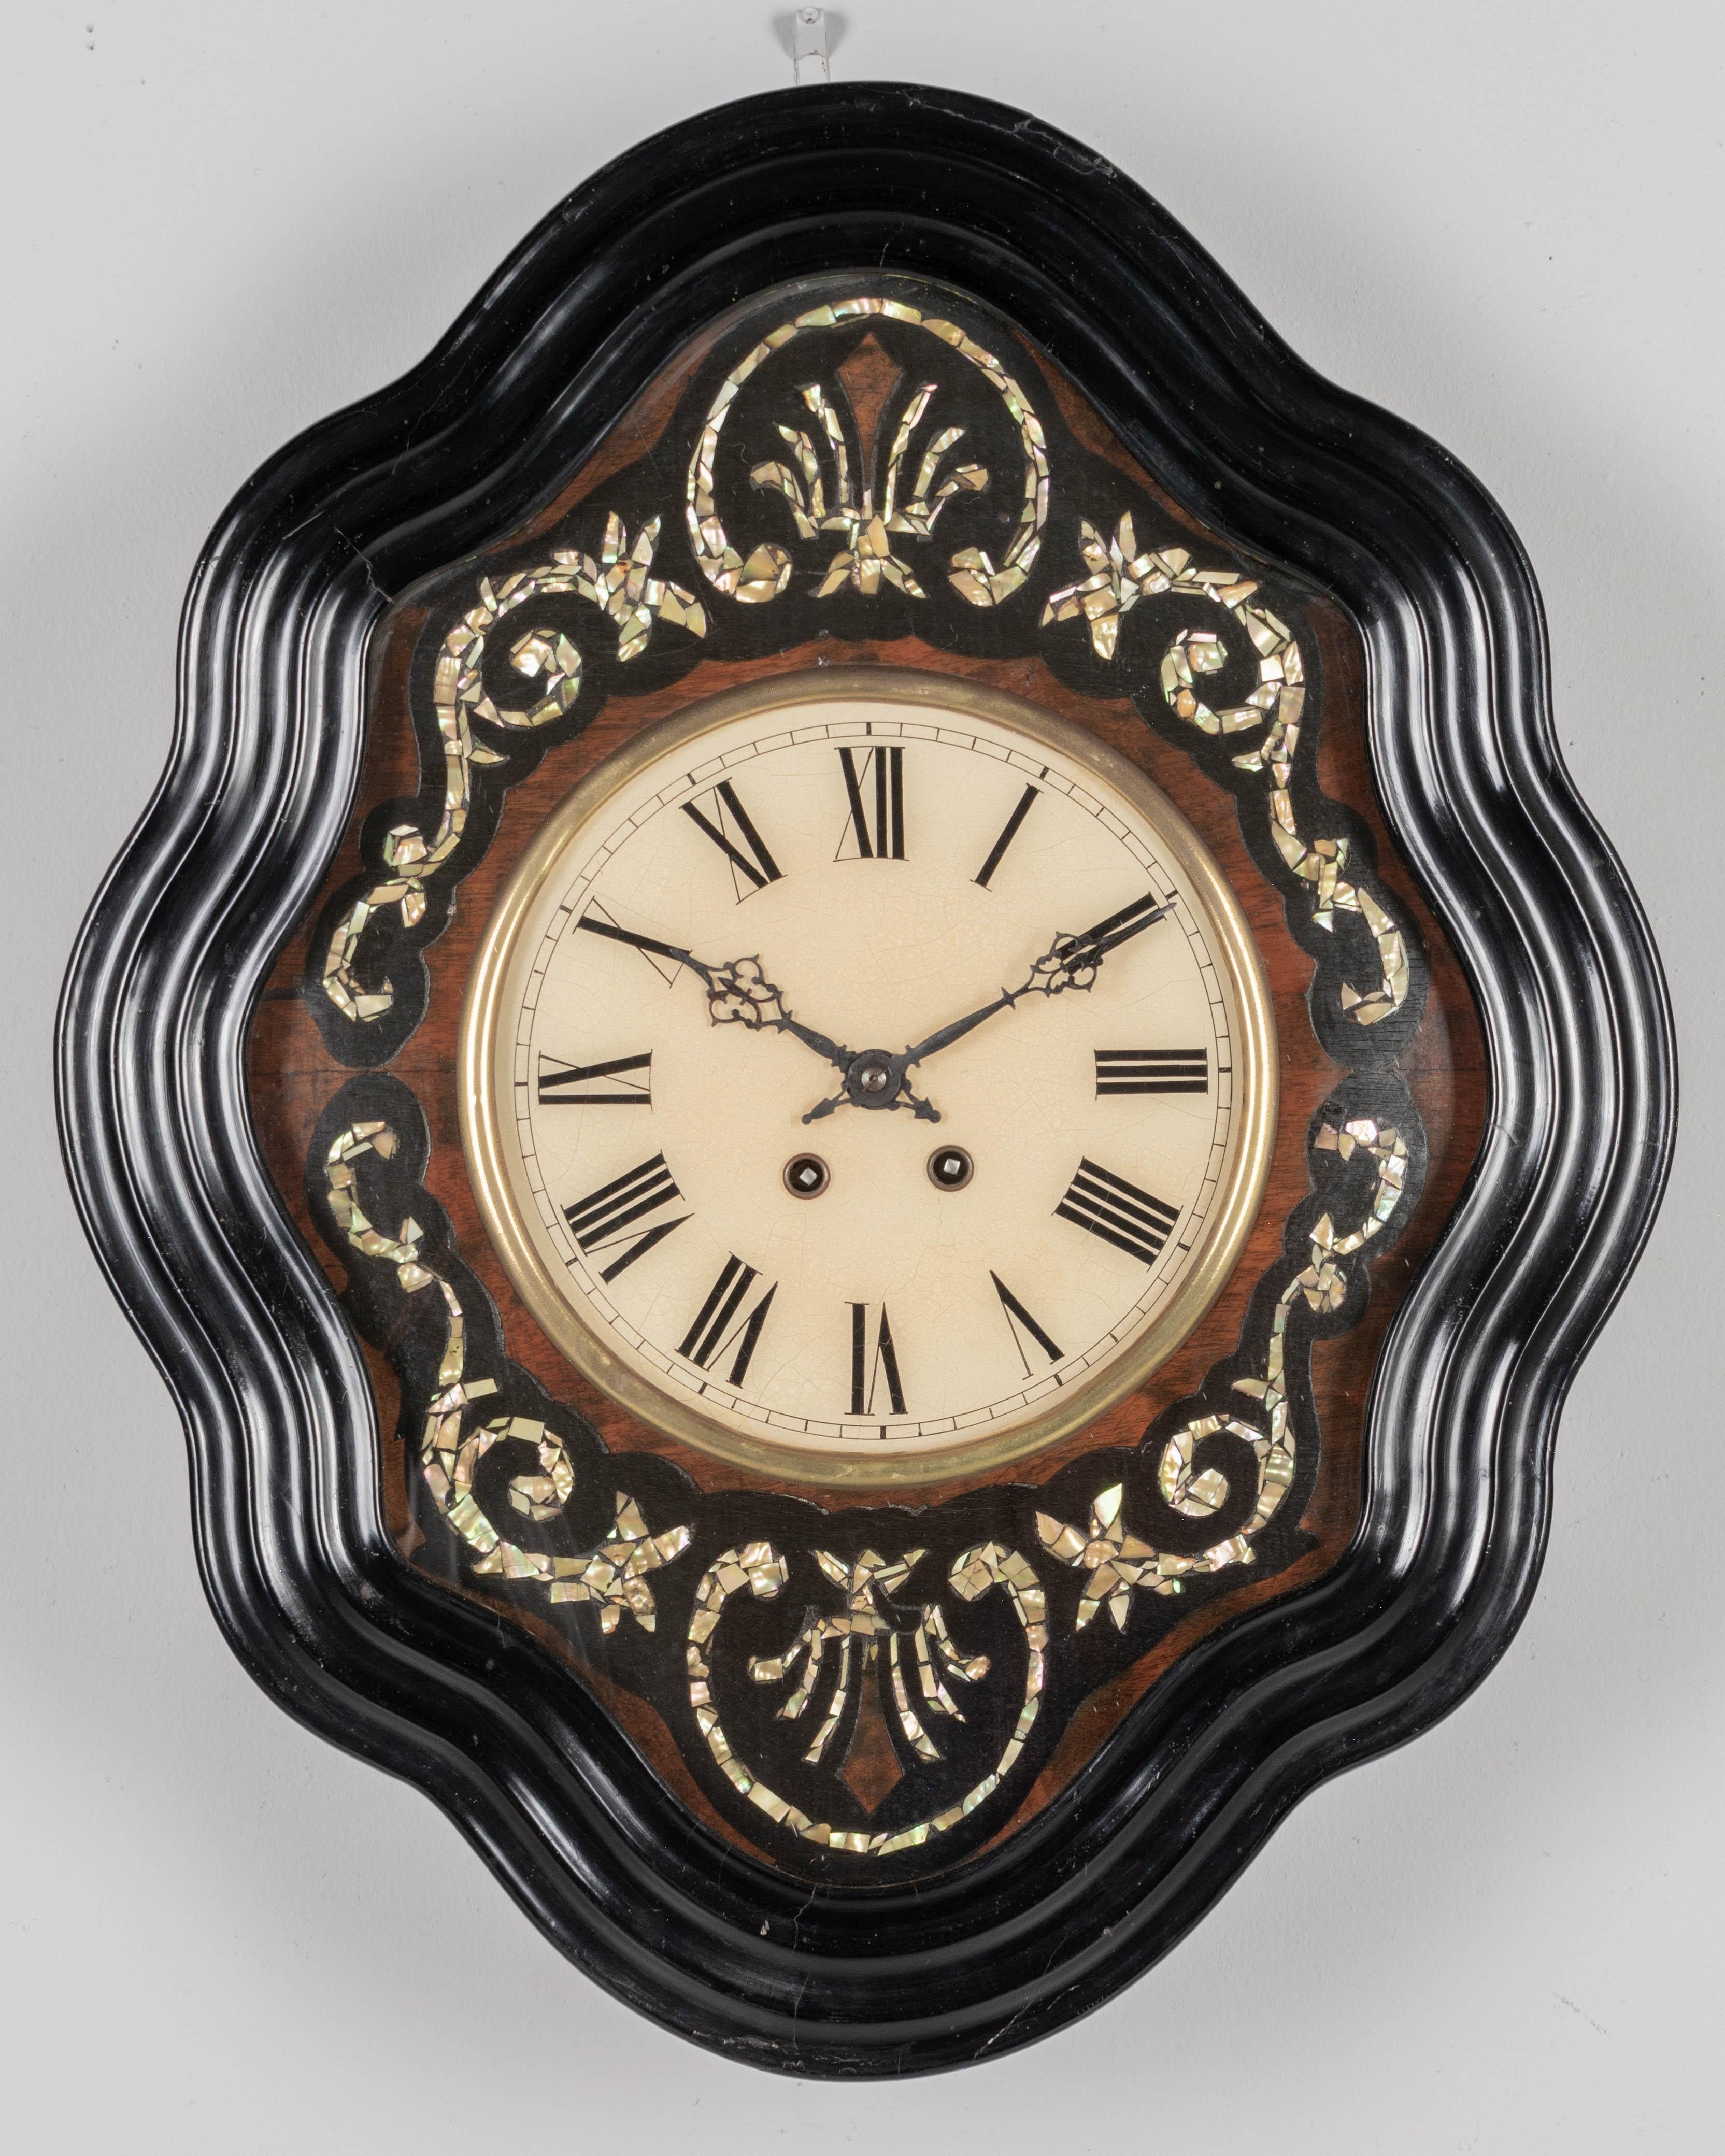 A 19th century French Napoleon III wall clock with 